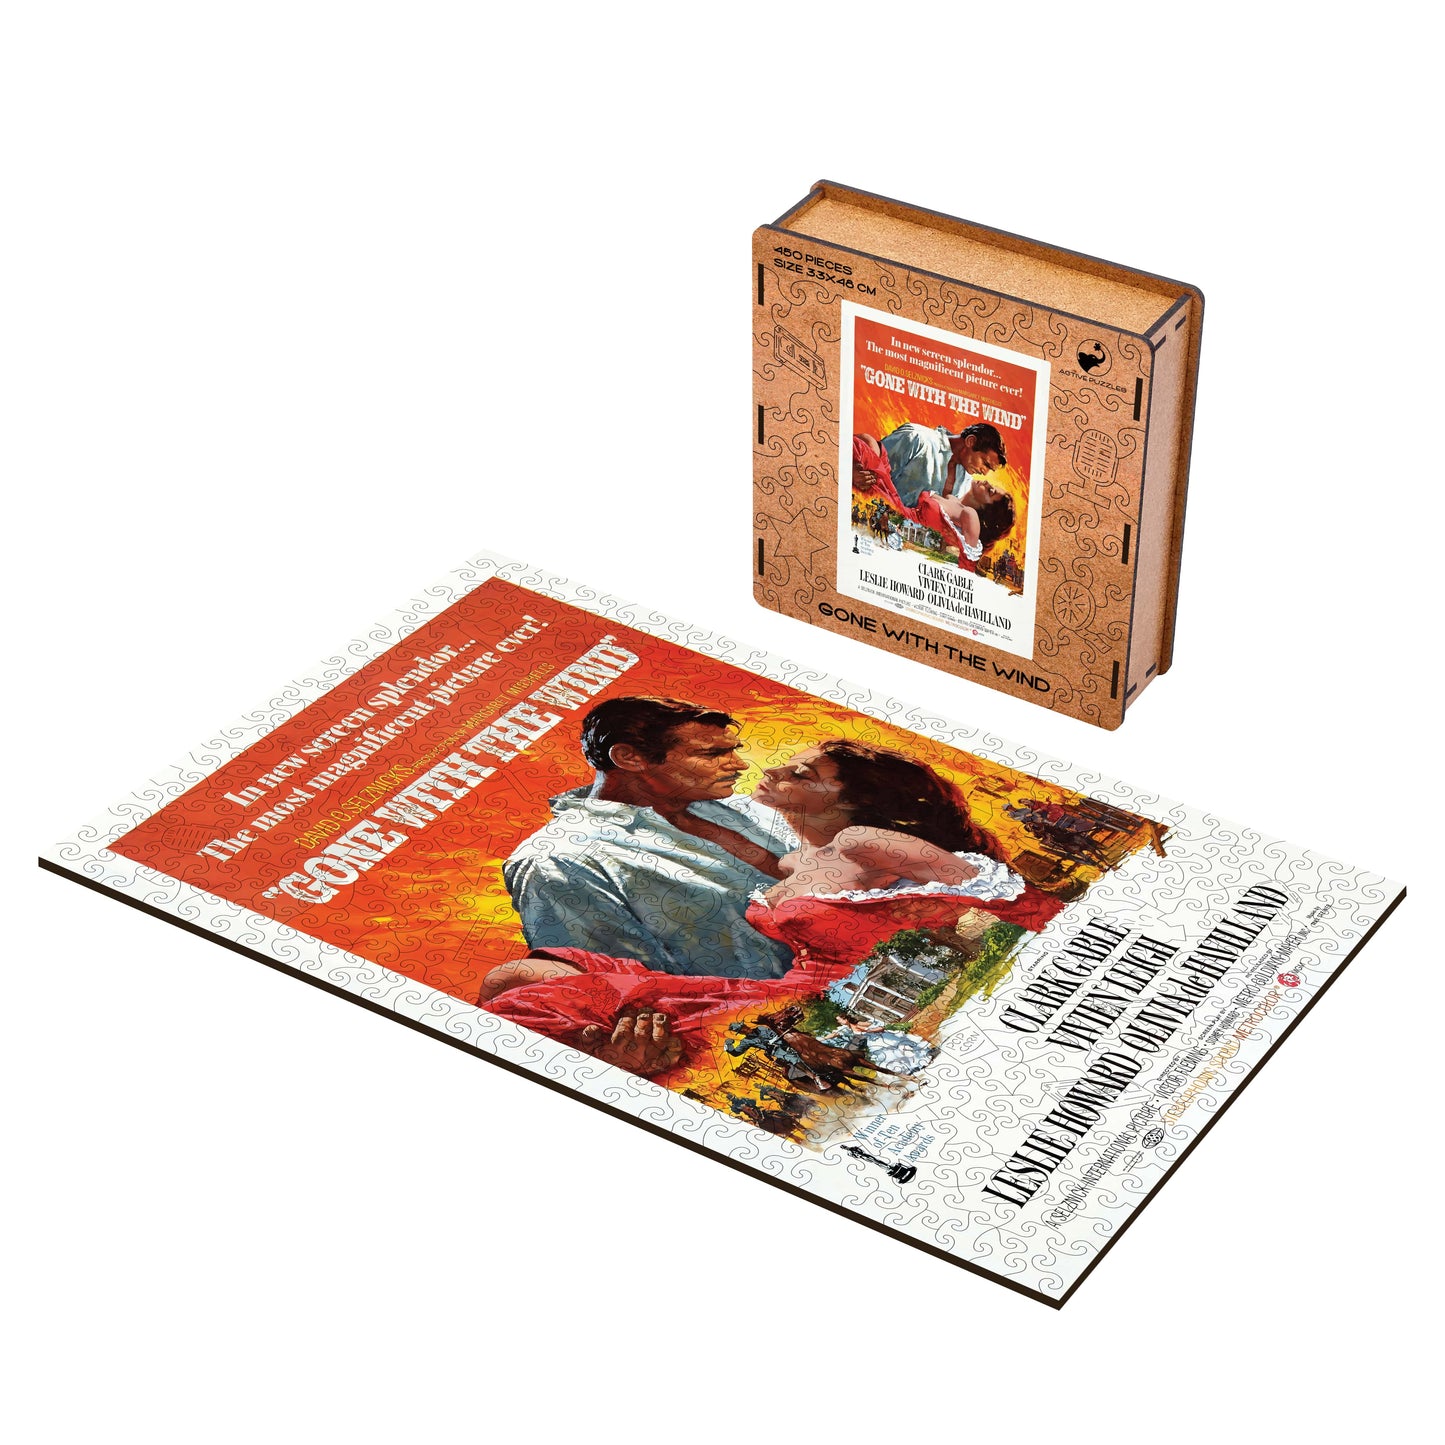 Gone with the Wind Film Poster Wooden Puzzle Active Puzzles